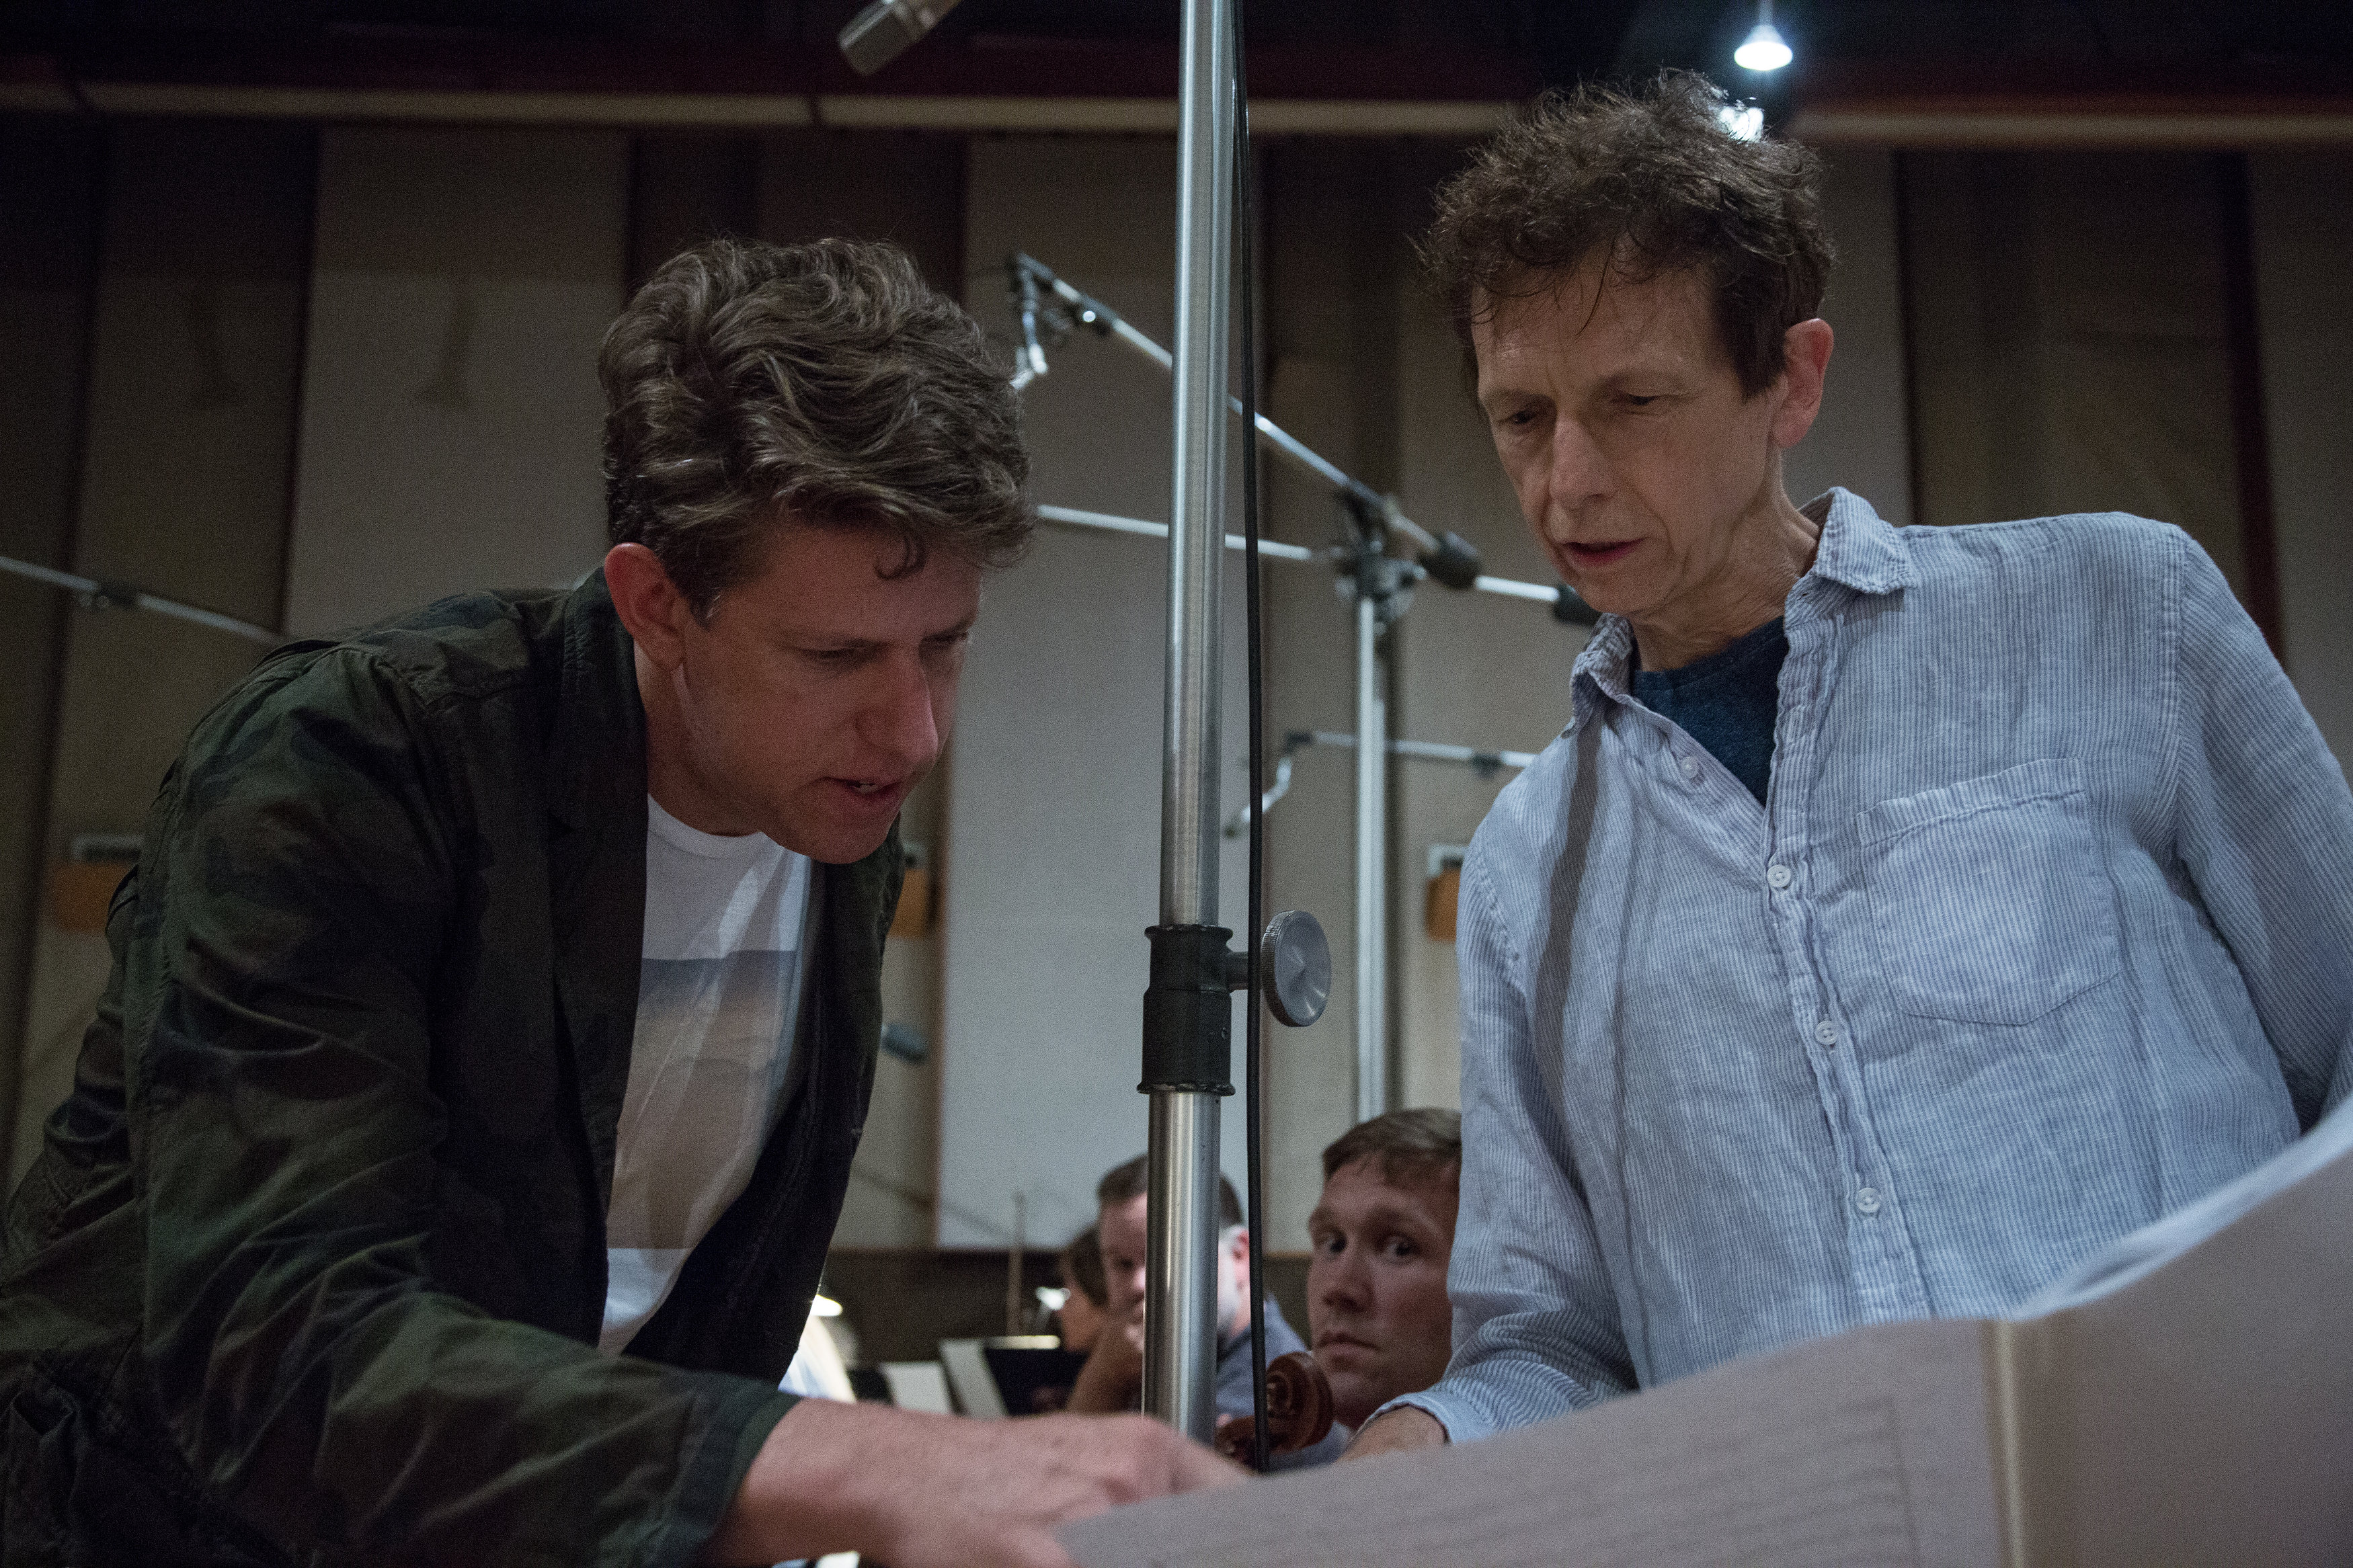 David Campbell with Greg Kurstin recording the music for the film Annie (2014)